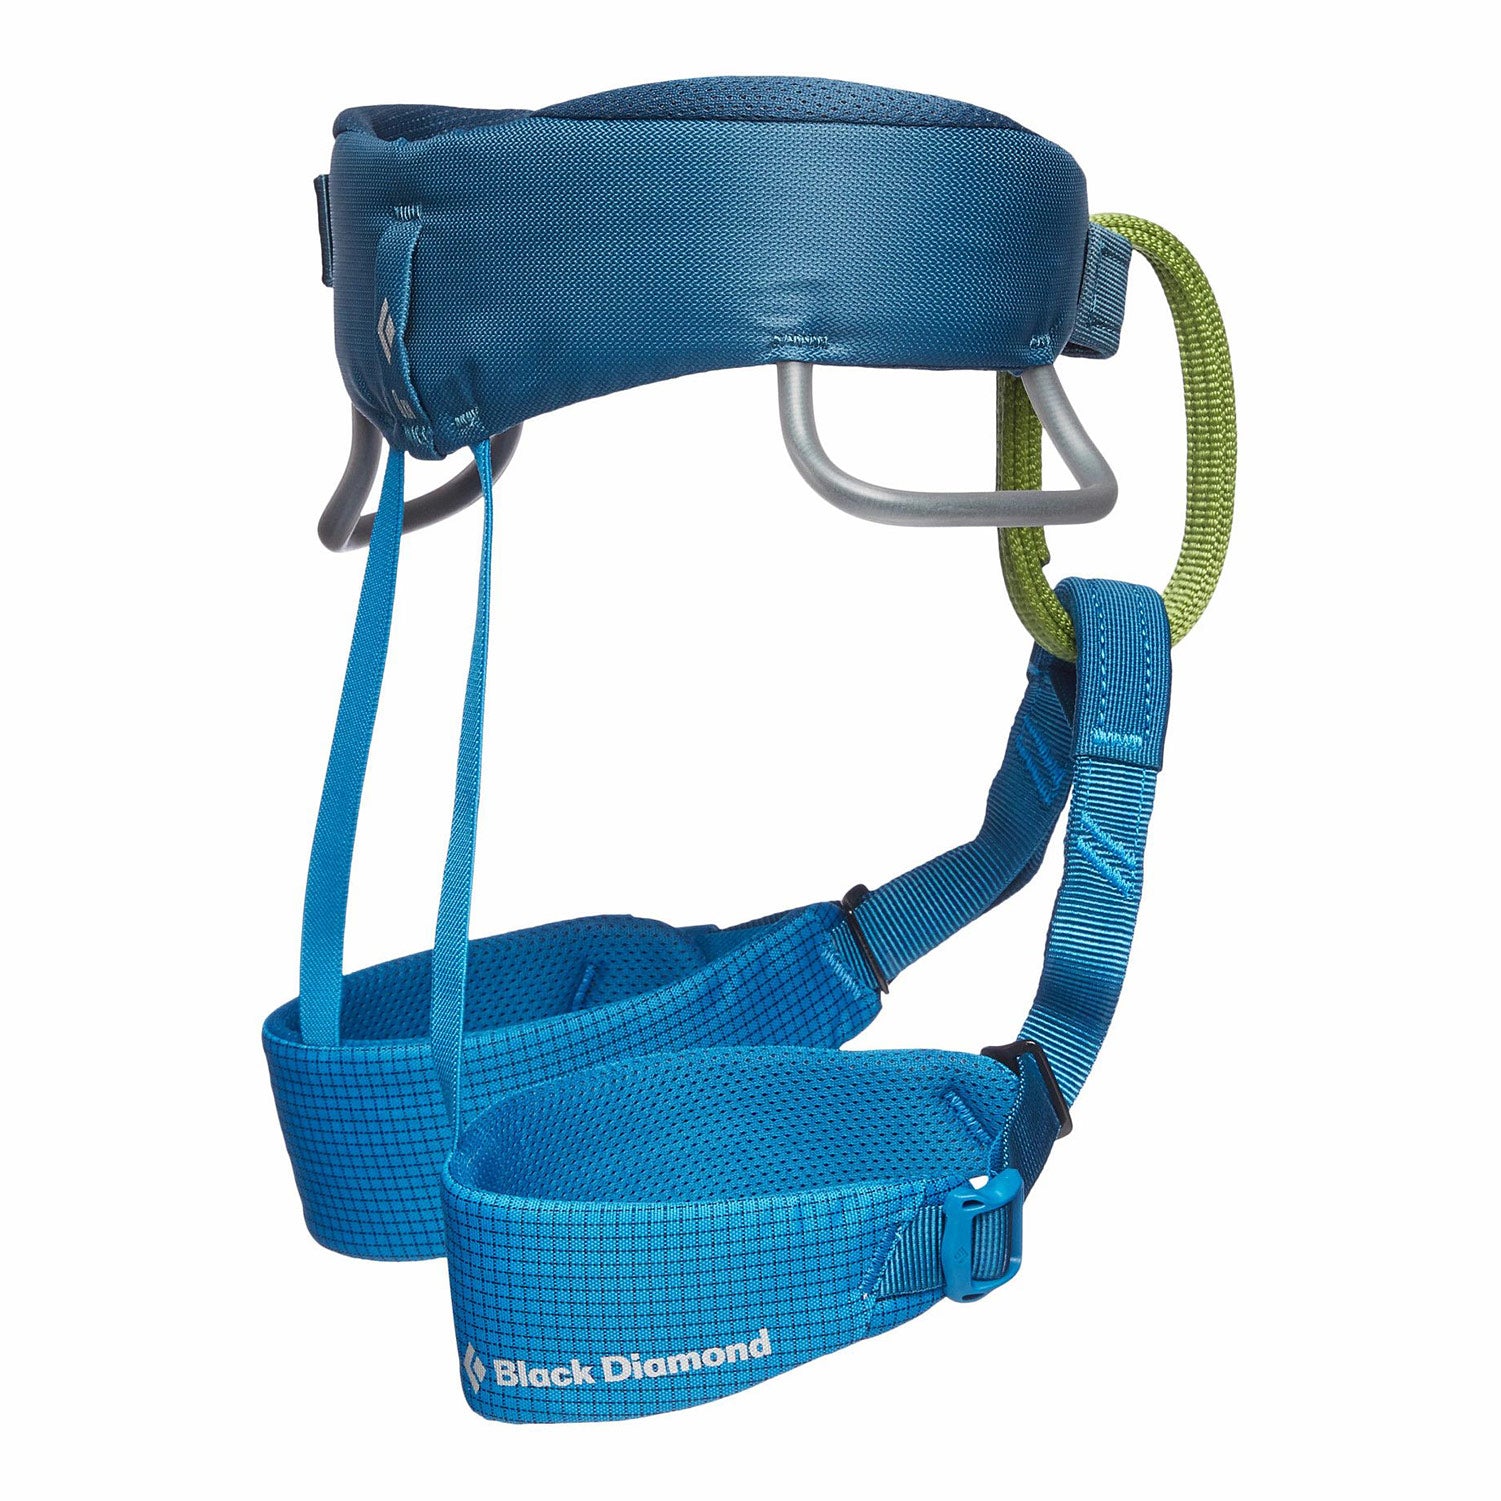 a side view of a blue kid's climbing harness